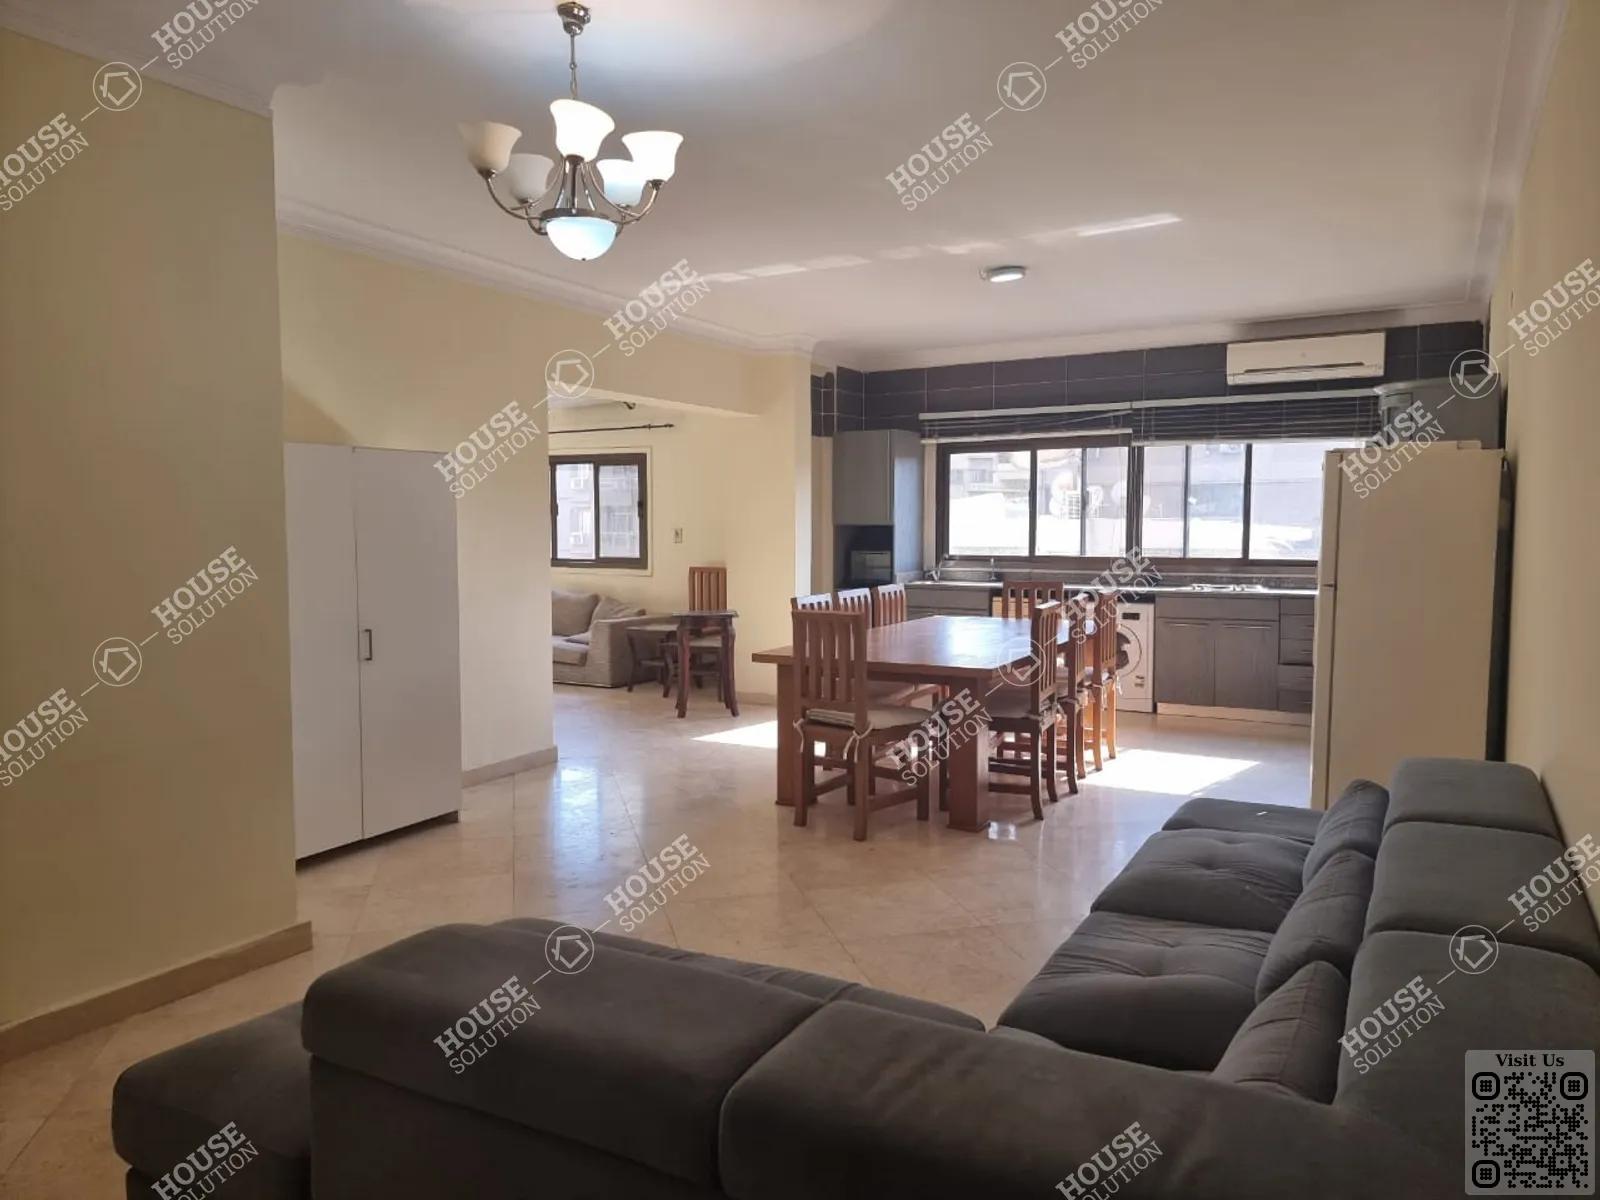 RECEPTION  @ Apartments For Rent In Maadi Maadi Degla Area: 160 m² consists of 2 Bedrooms 2 Bathrooms Furnished 5 stars #5443-0